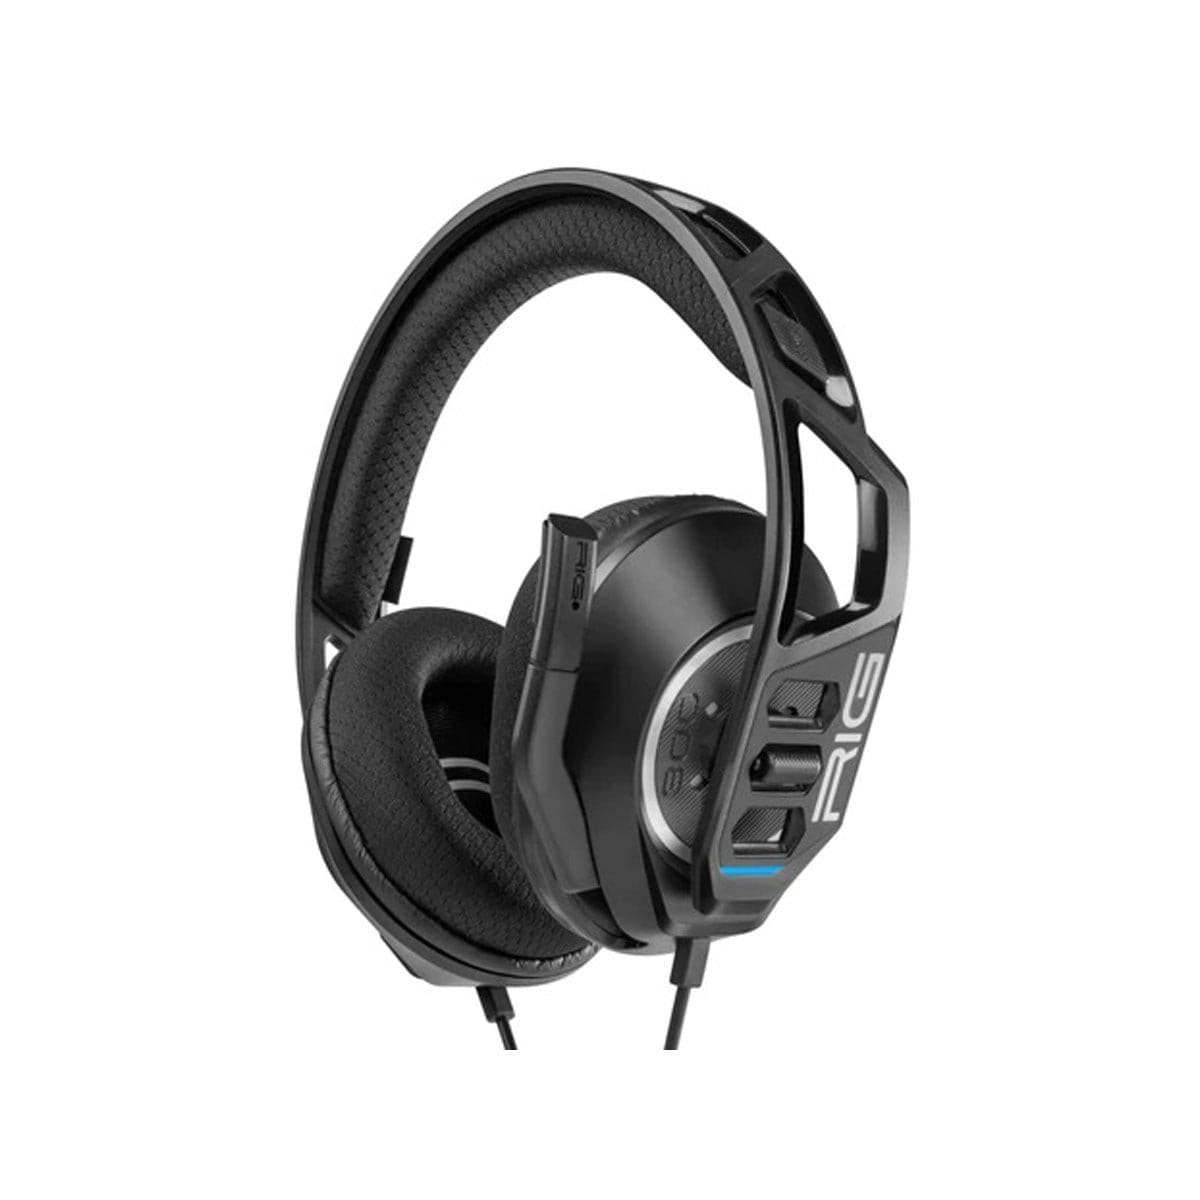 Rig 300 Pro HC Gaming Headset for PC - Black.